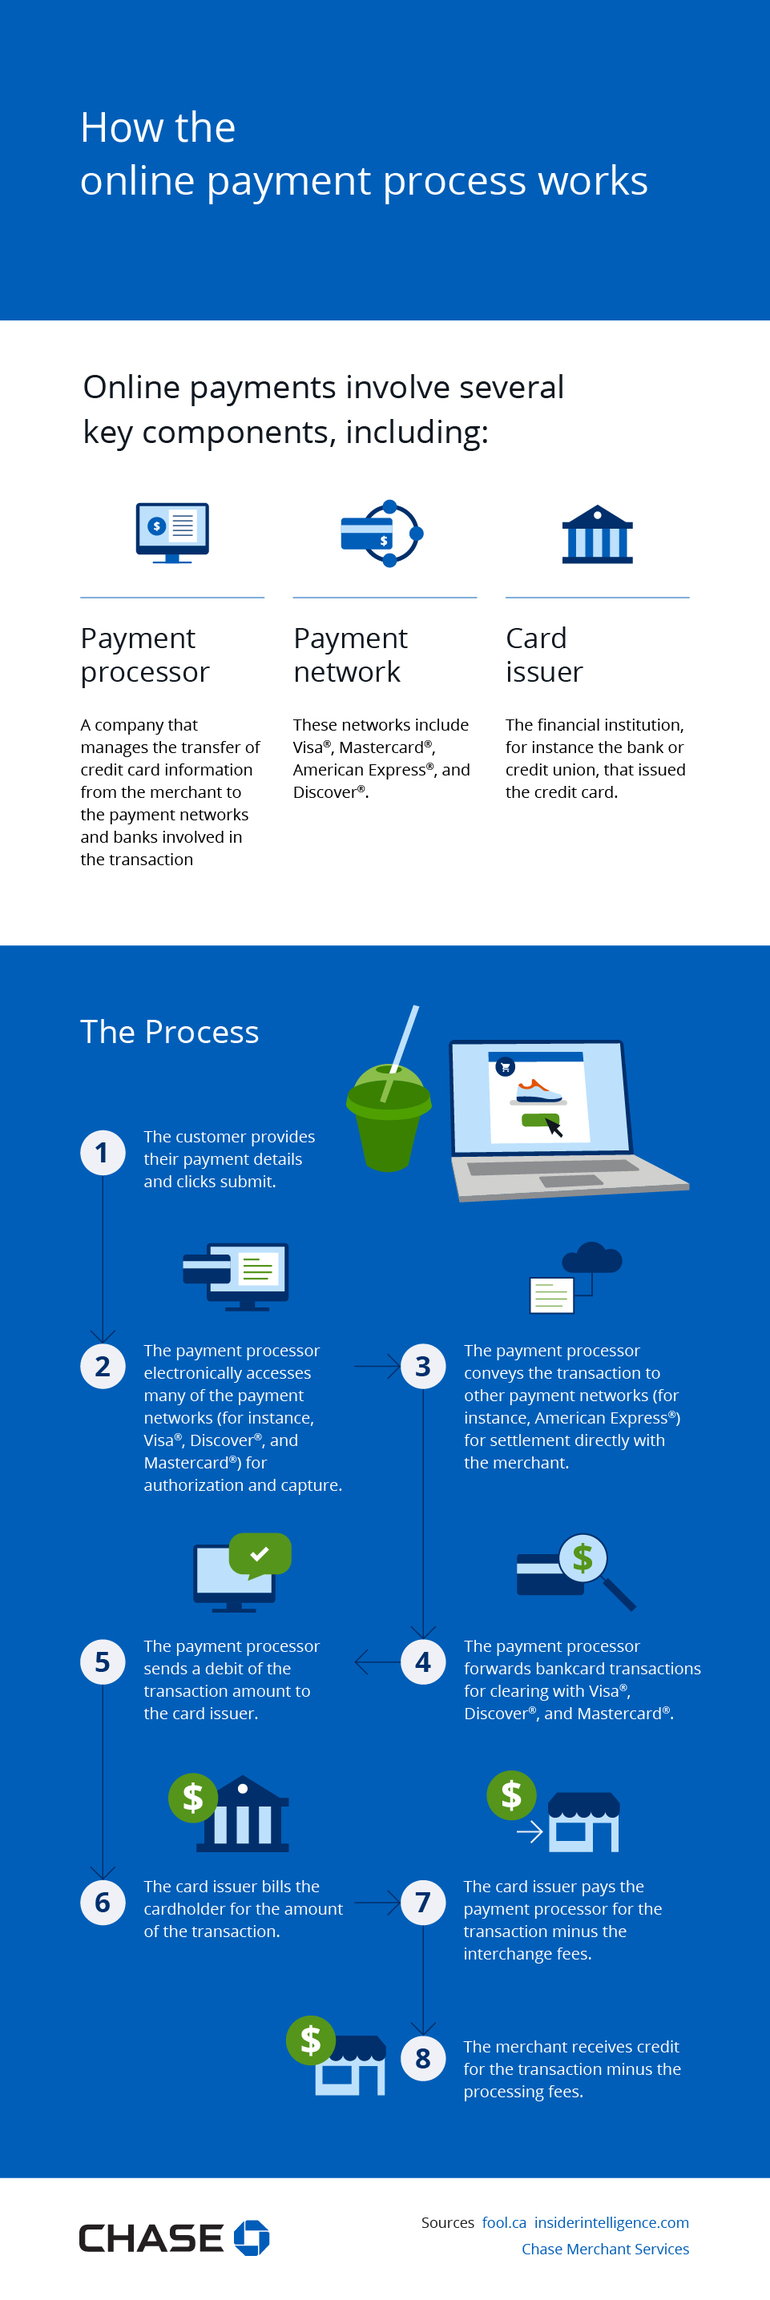 How the online payment process works